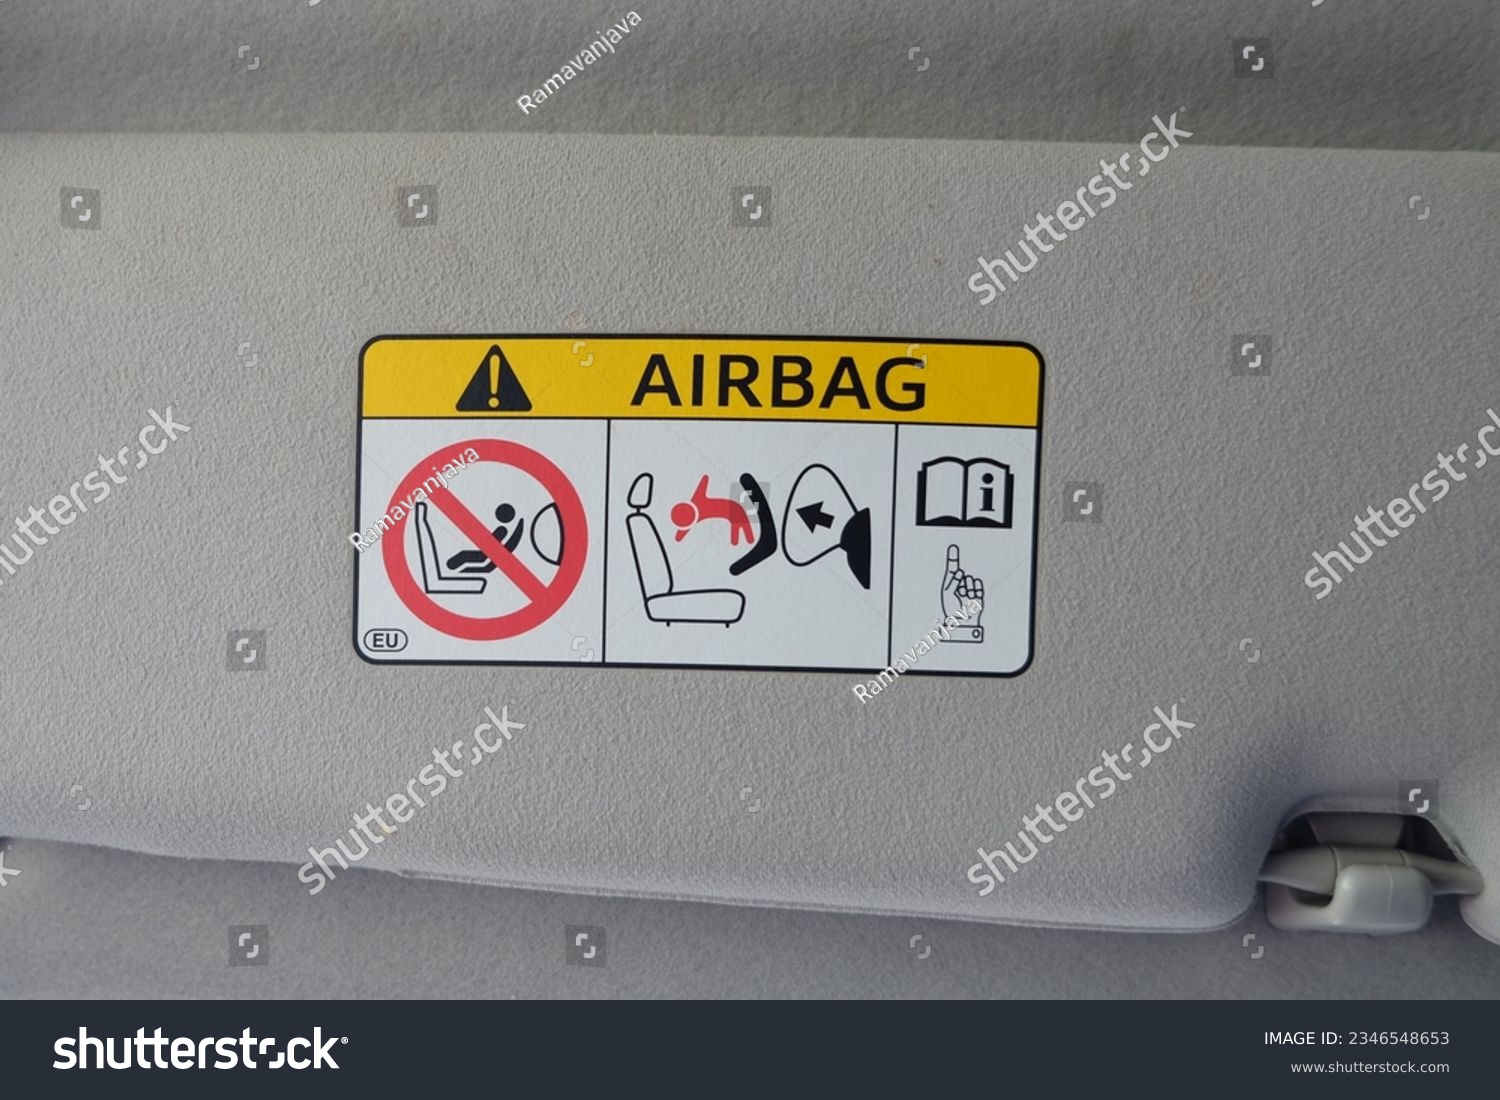 Instructions on how to use the safety airbag in a car #2346548653